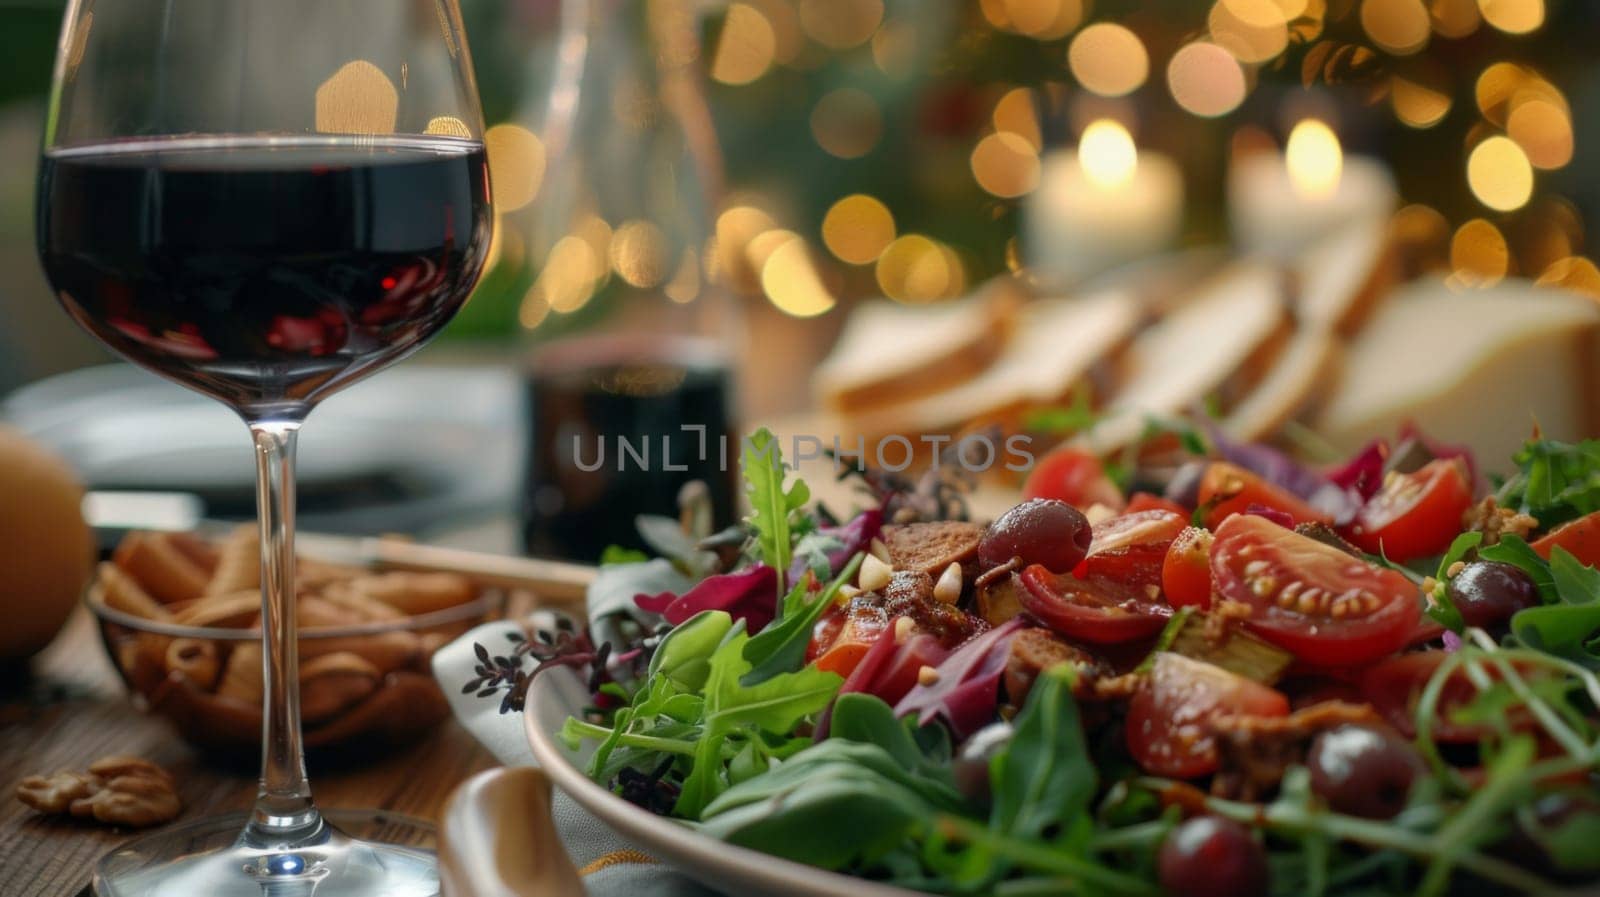 A glass of a plate with salad and wine on the table